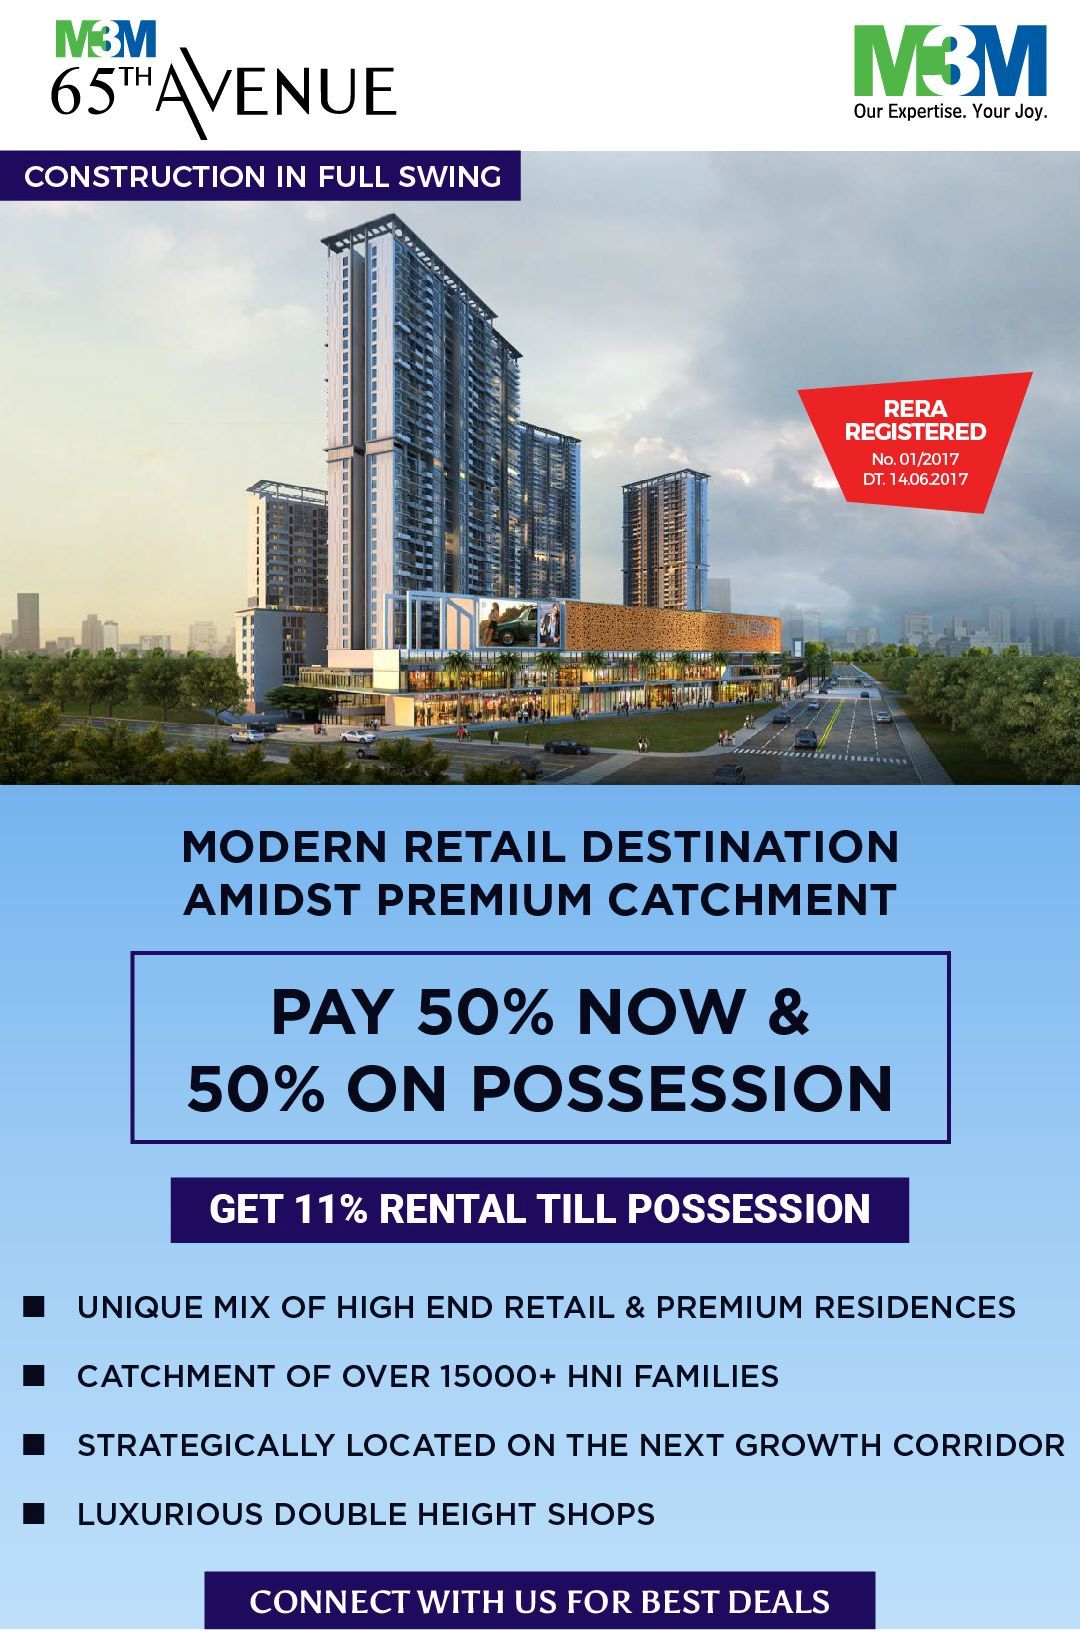 Pay 50% now & 50% on possession at M3M 65th Avenue in Gurgaon Update